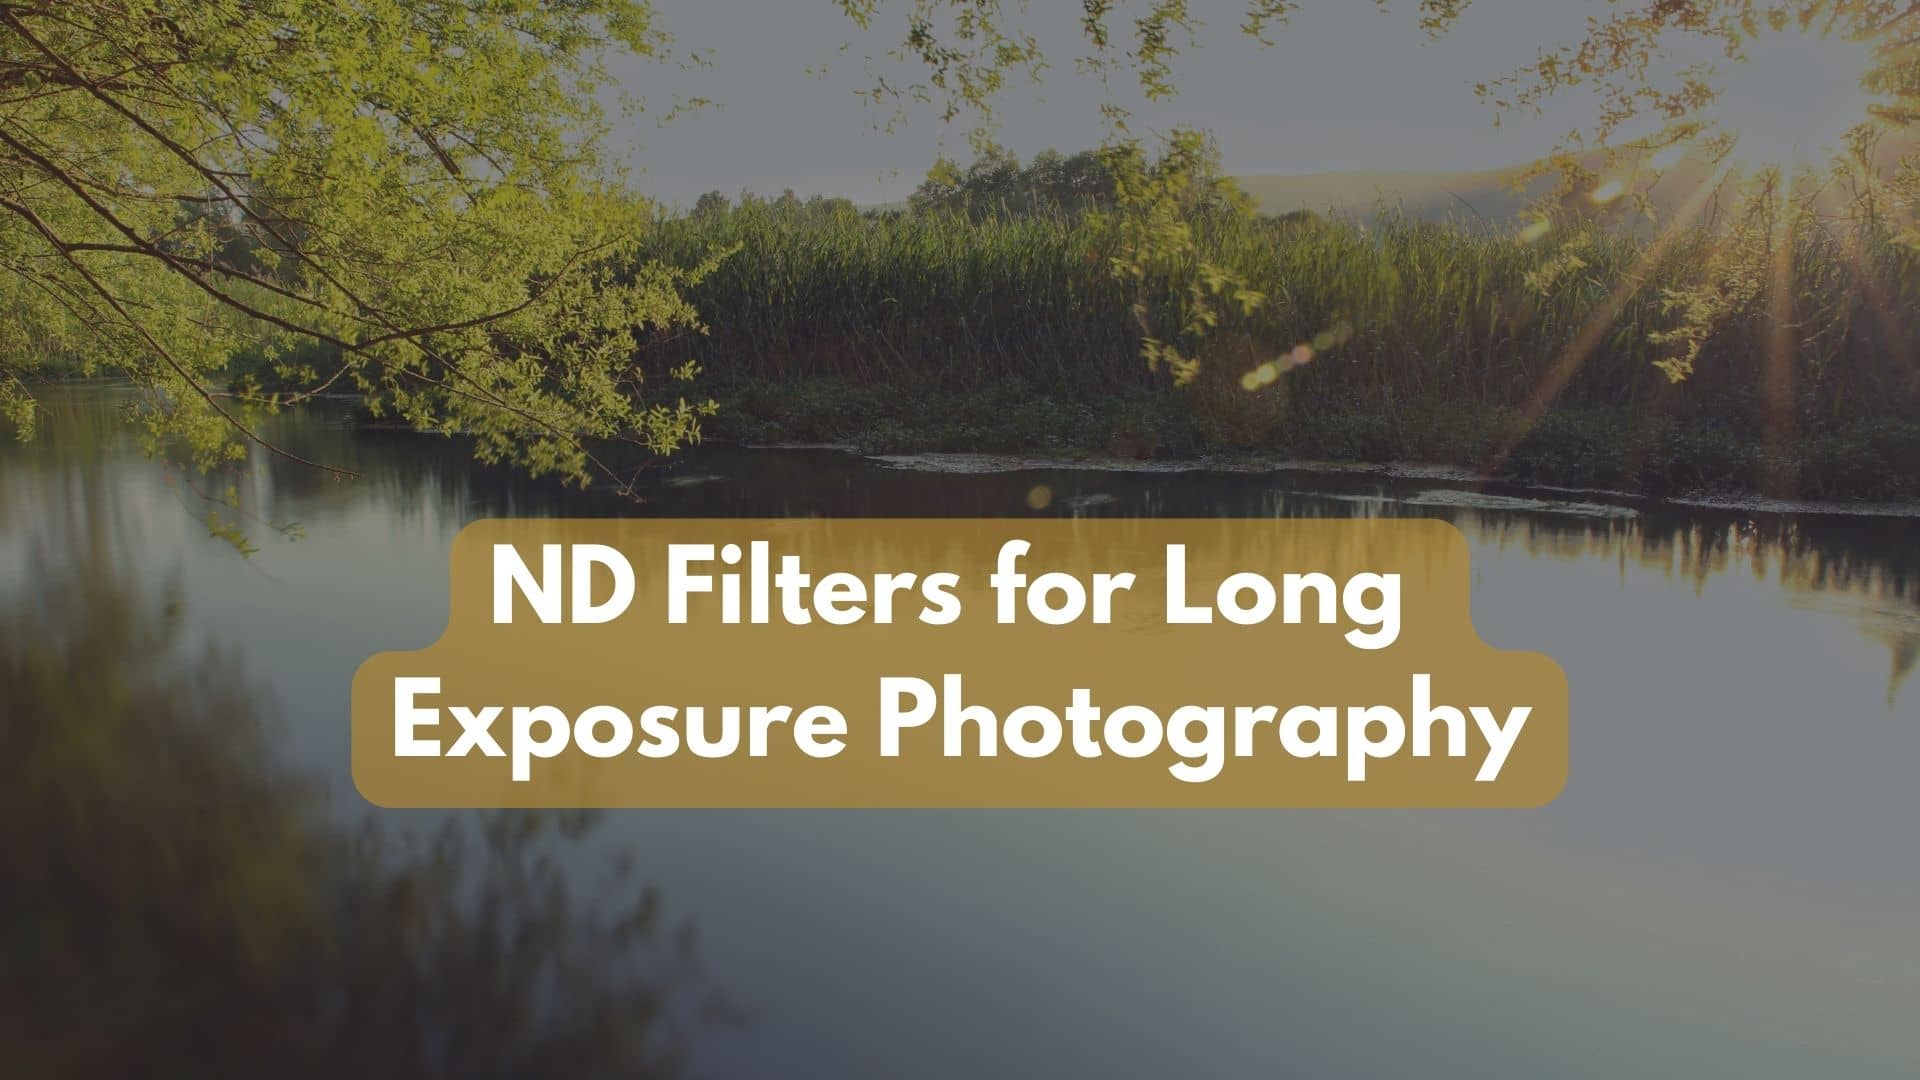 How to Using ND Filters for Long Exposure Photography?